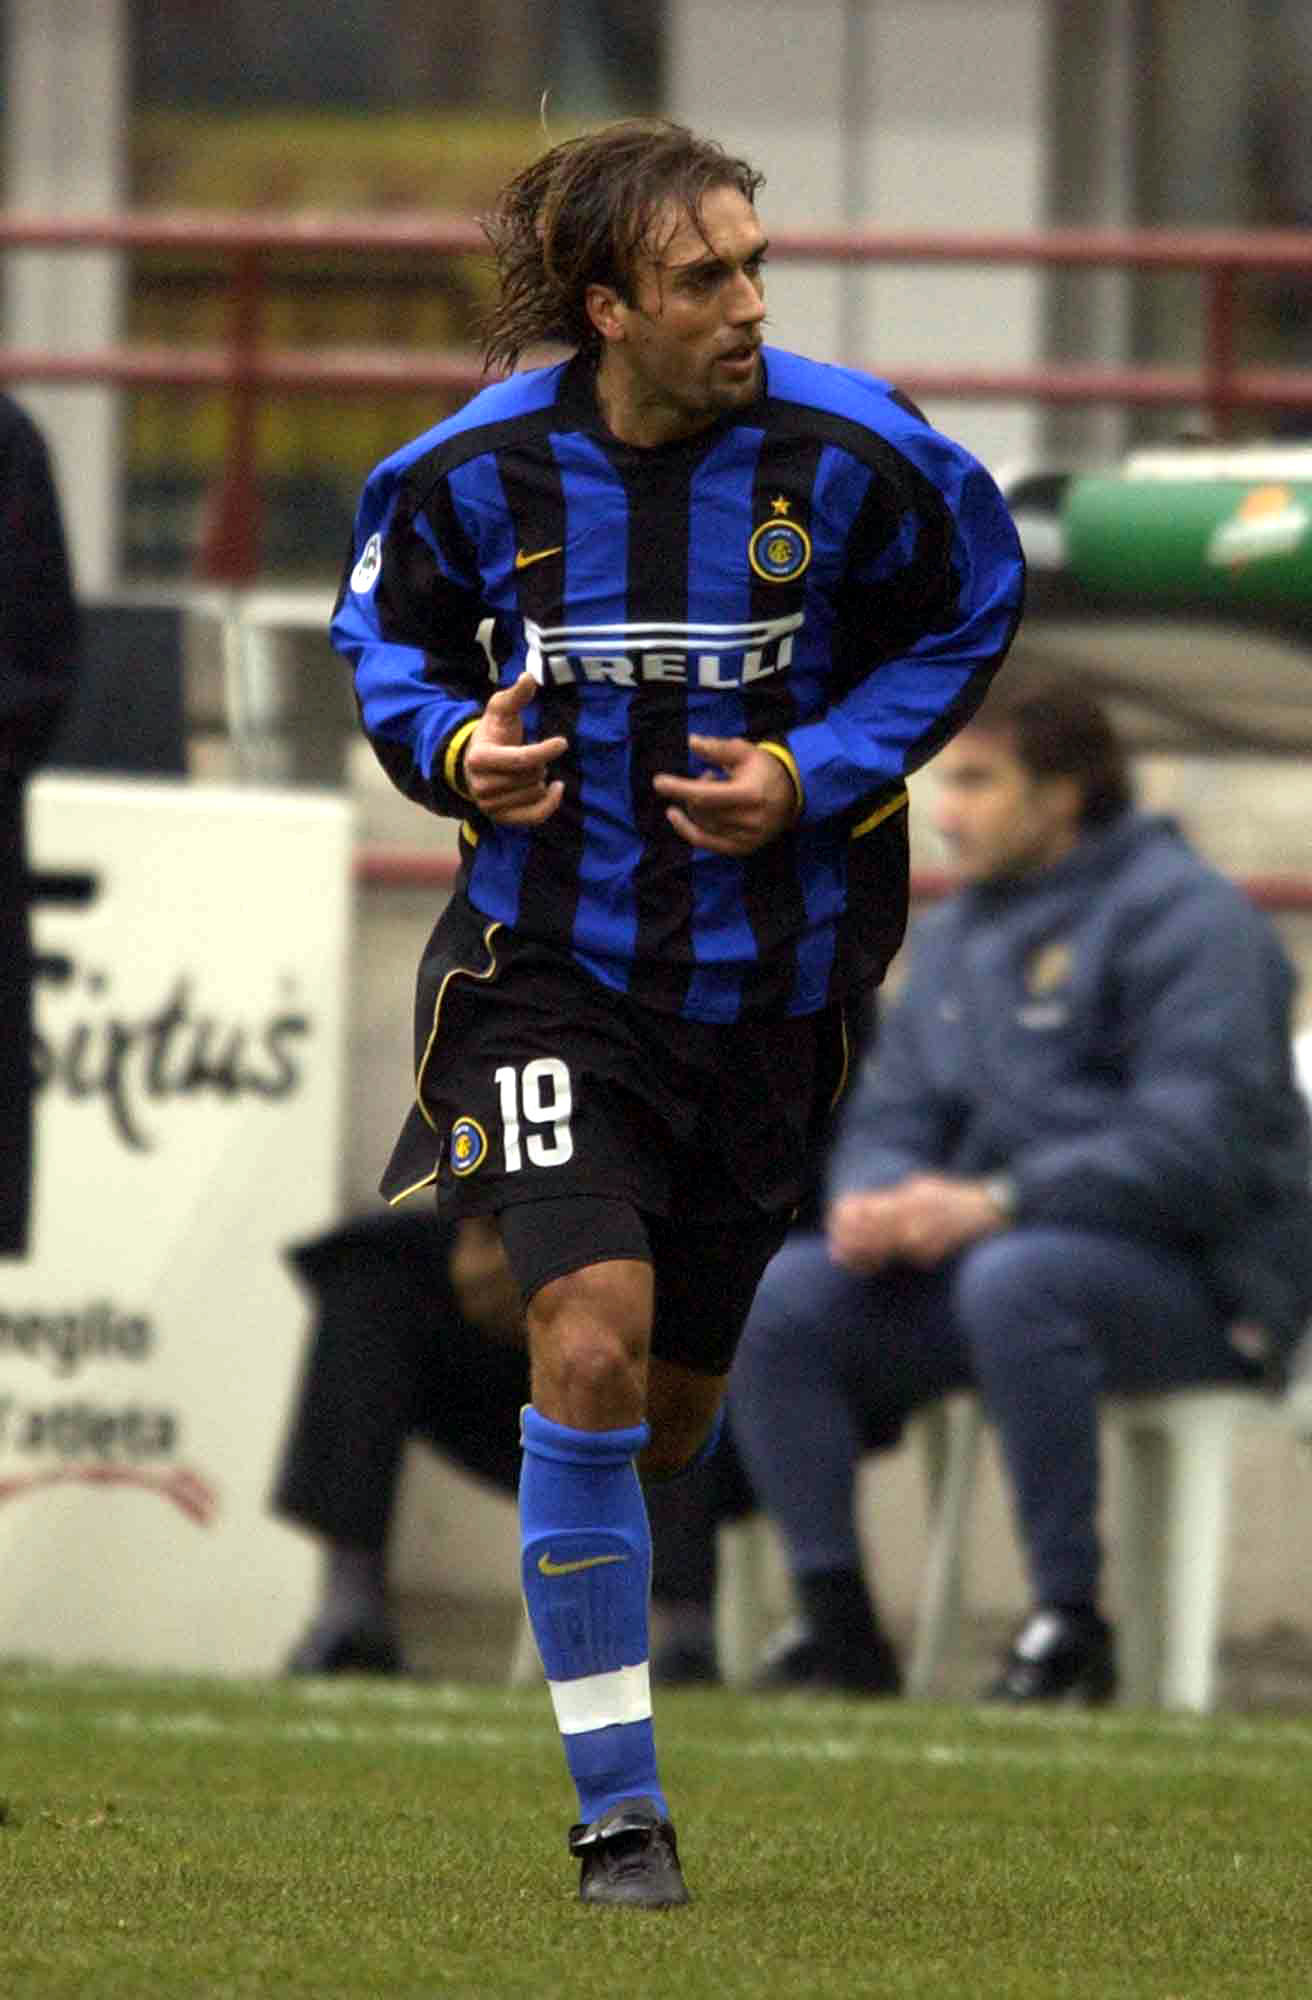 MILAN - FEBRUARY 9:  Gabriel Batistuta of Inter Milan in action during the Serie A match between Inter Milan and Reggina, played at Giuseppe Meazza San Siro Stadium, Milan, Italy on February 9, 2003.  (Photo by Grazia Neri/Getty Images)